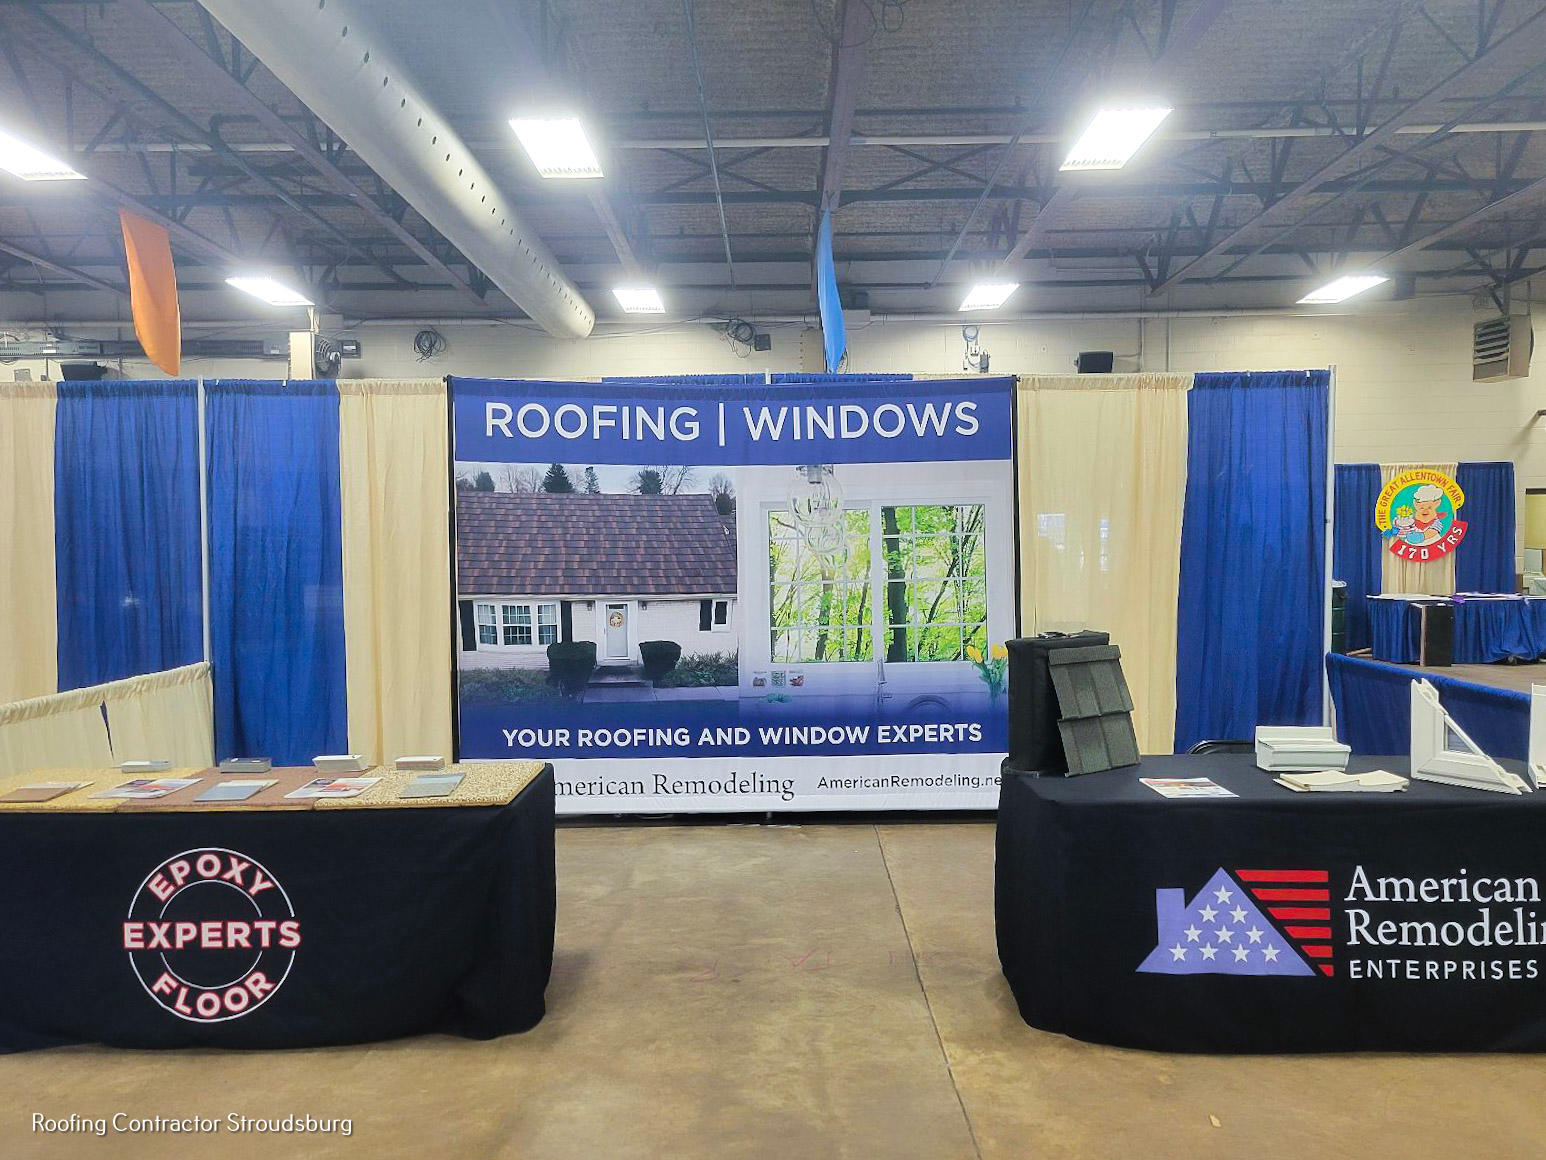 American Remodeling Enterprises Provides Awareness of Roofing Systems